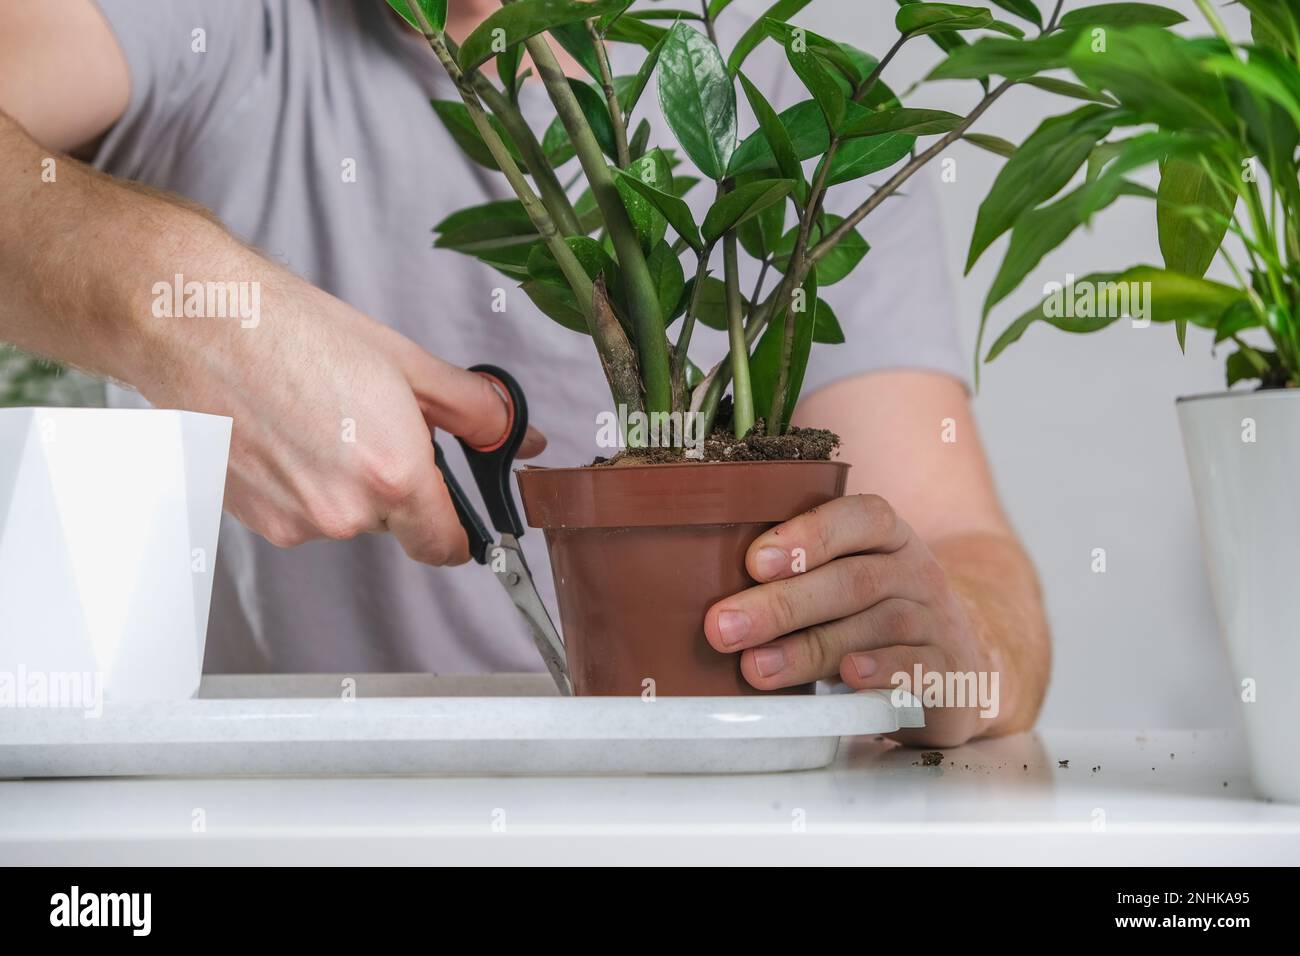 Transplanting zamiokulkas from a small pot to a large one. A man cuts an old pot with scissors to pull out a houseplant with overgrown bulbs. Spring gardening. Stock Photo